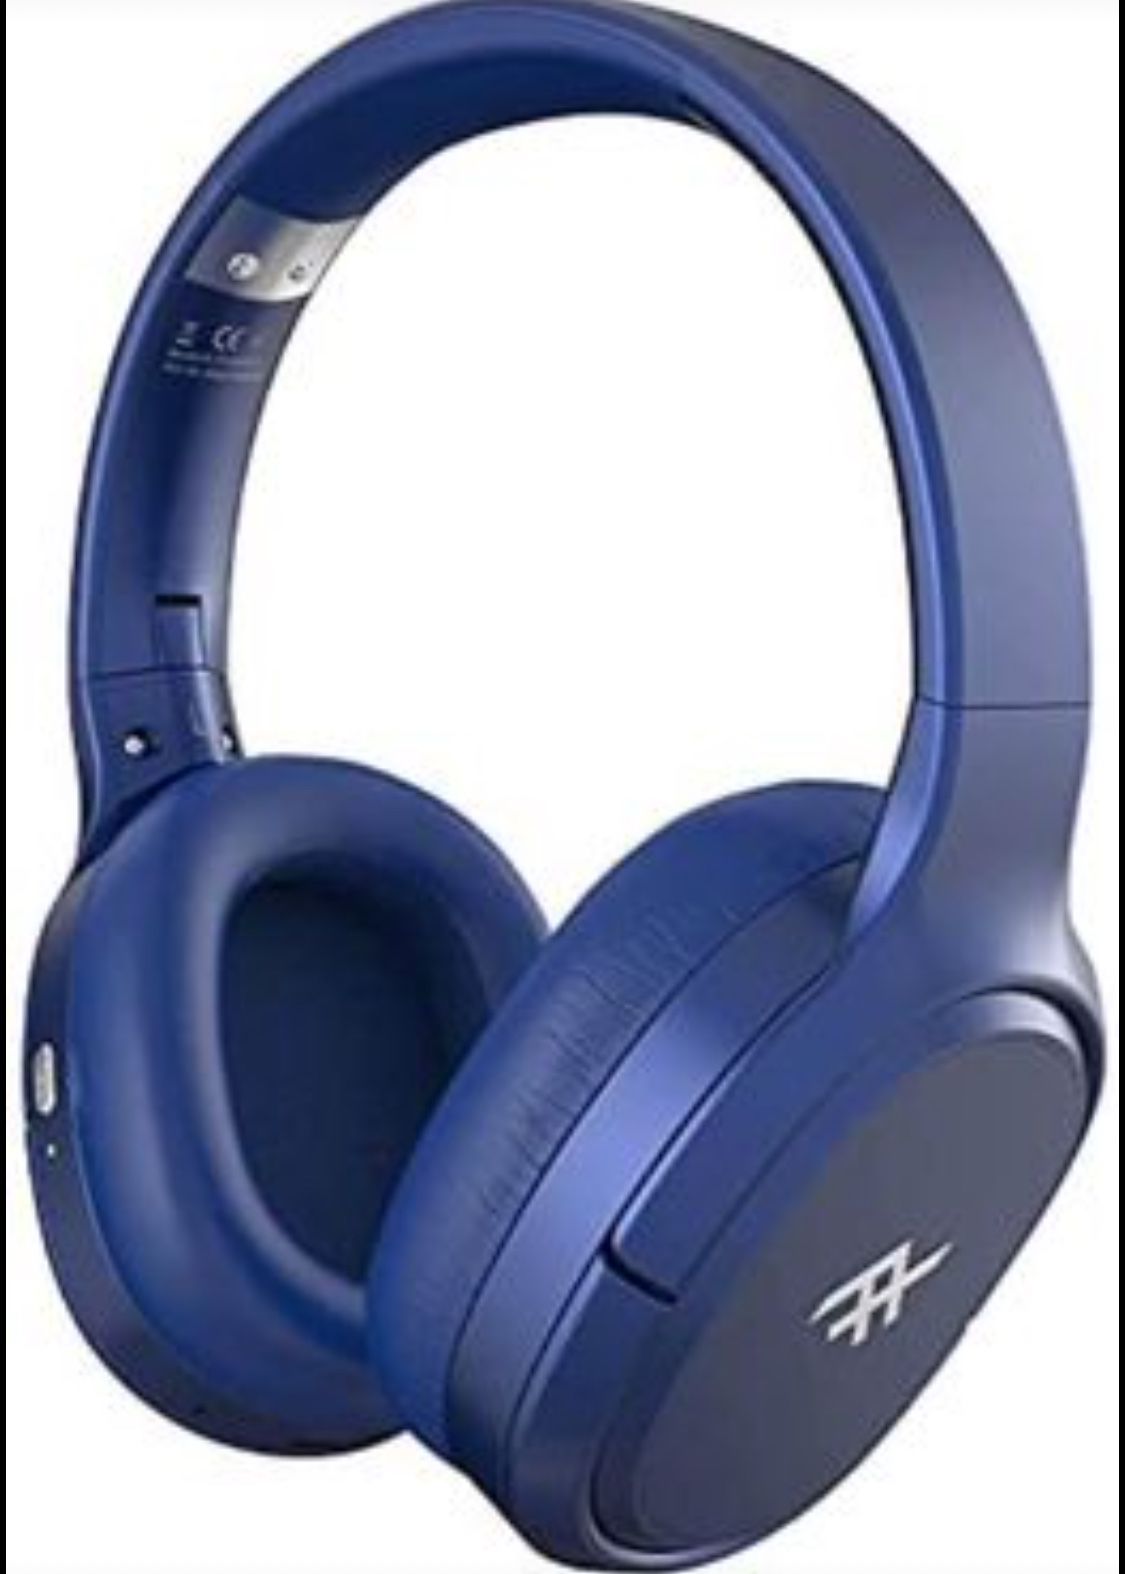 Wireless on Ear Headphones with Active Noise-canceling Technology, Blue